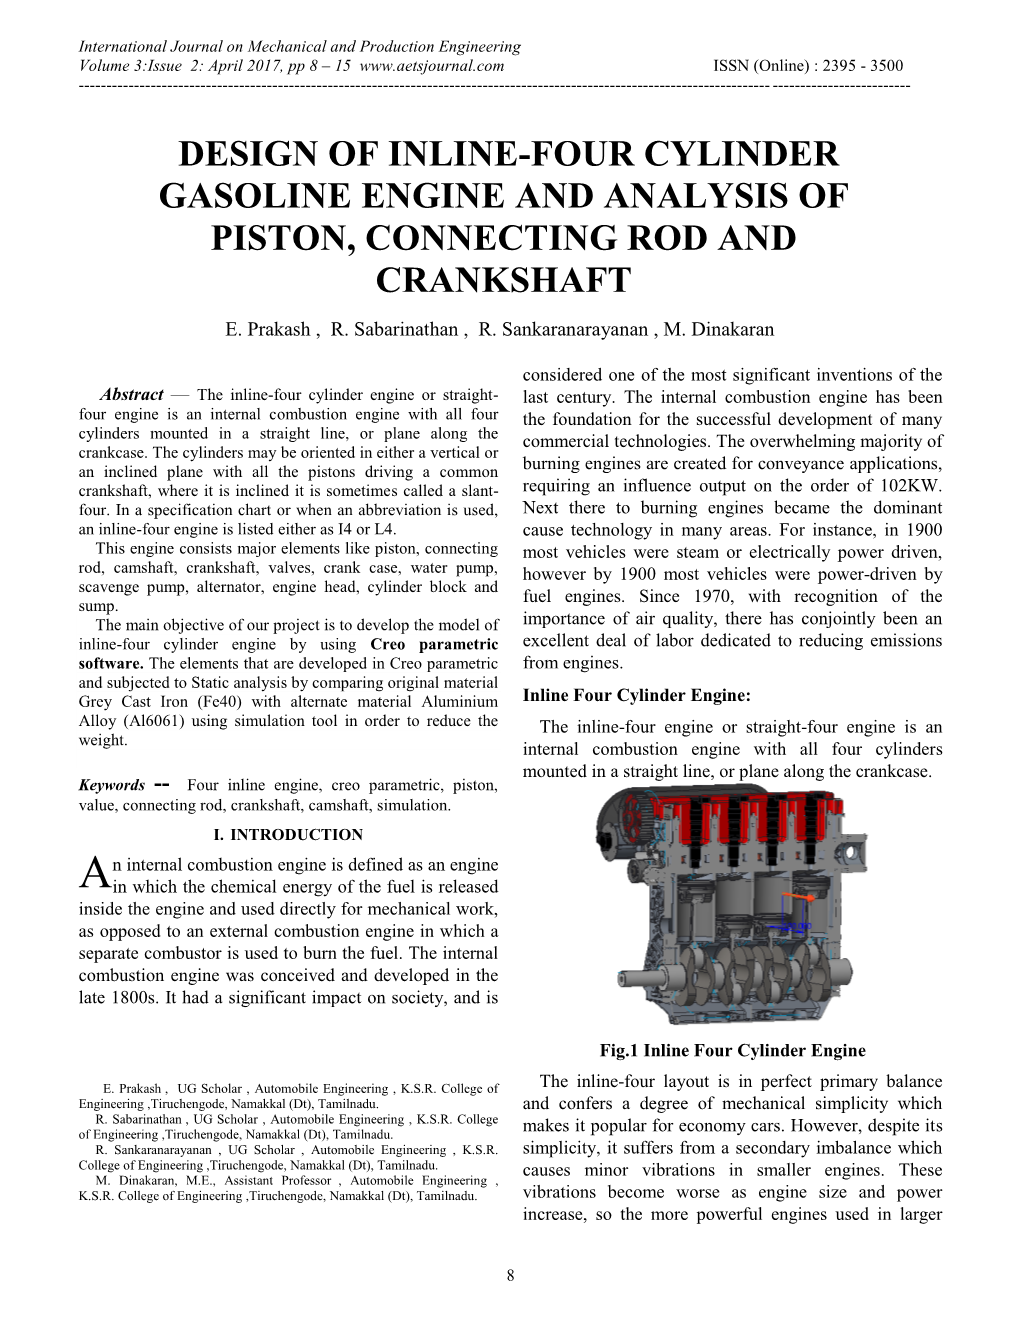 Design of Inline-Four Cylinder Gasoline Engine and Analysis of Piston, Connecting Rod and Crankshaft